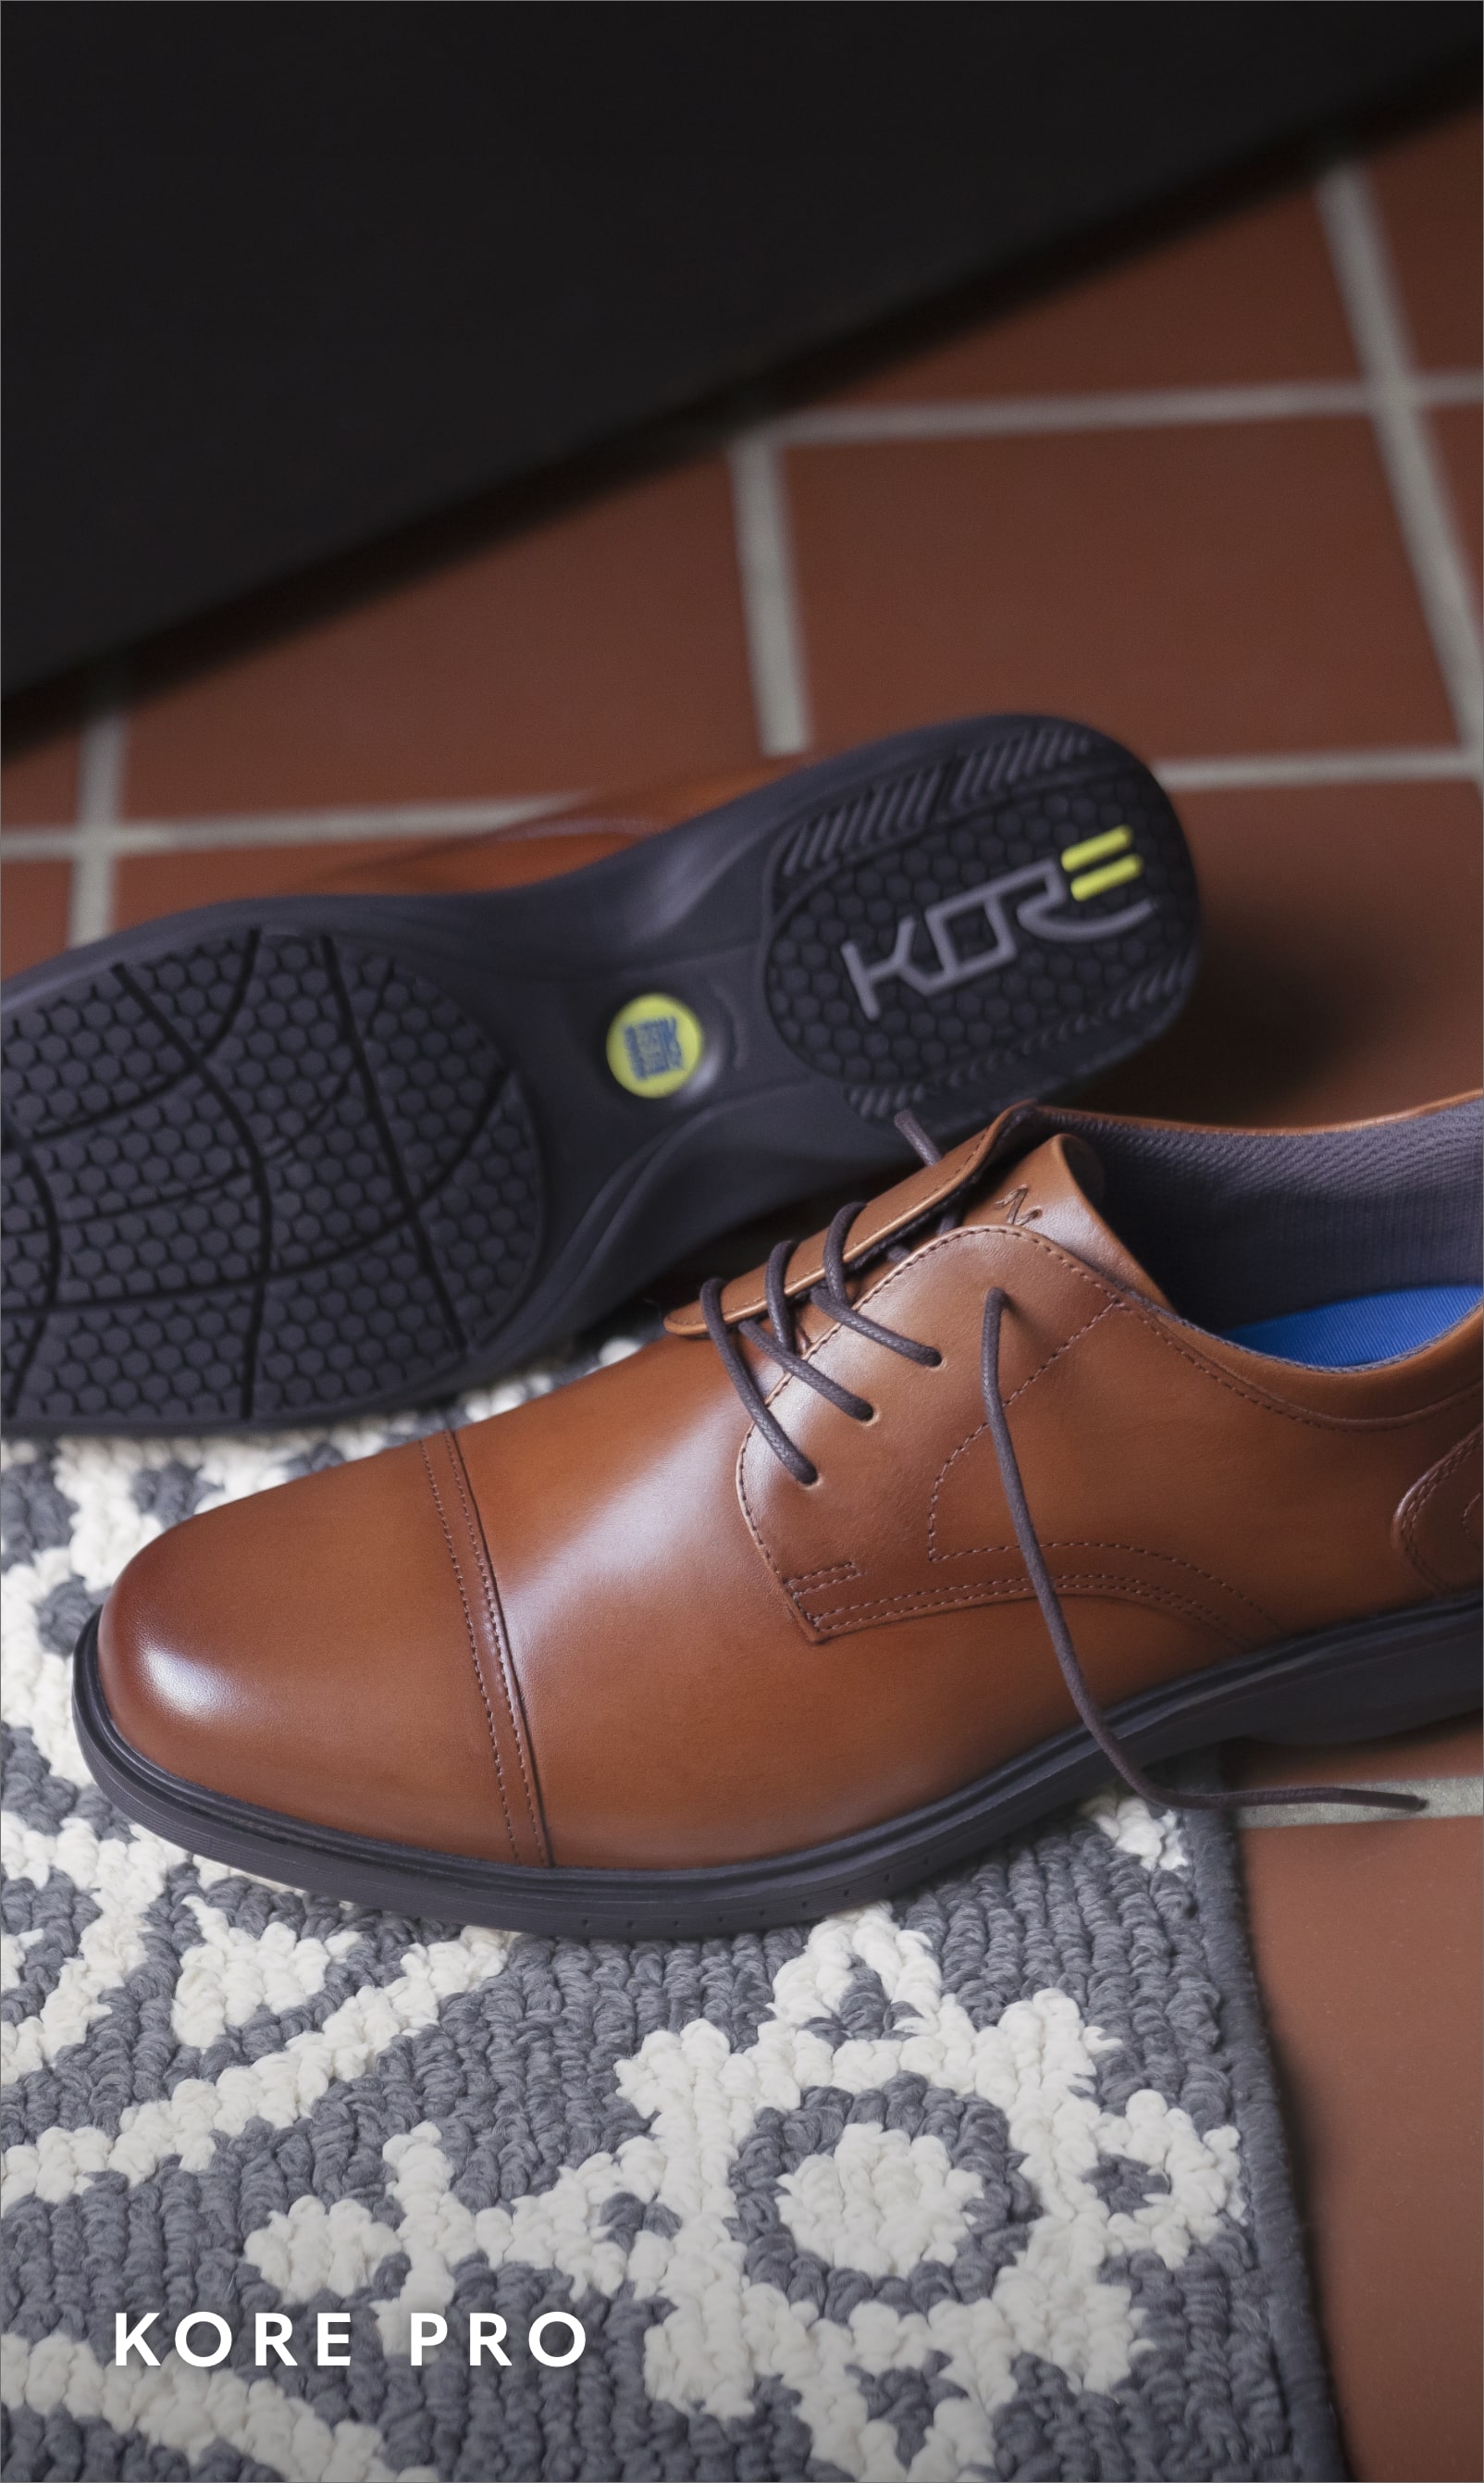 Men's Dress Shoes category. Image features the Kore Pro in cognac. 